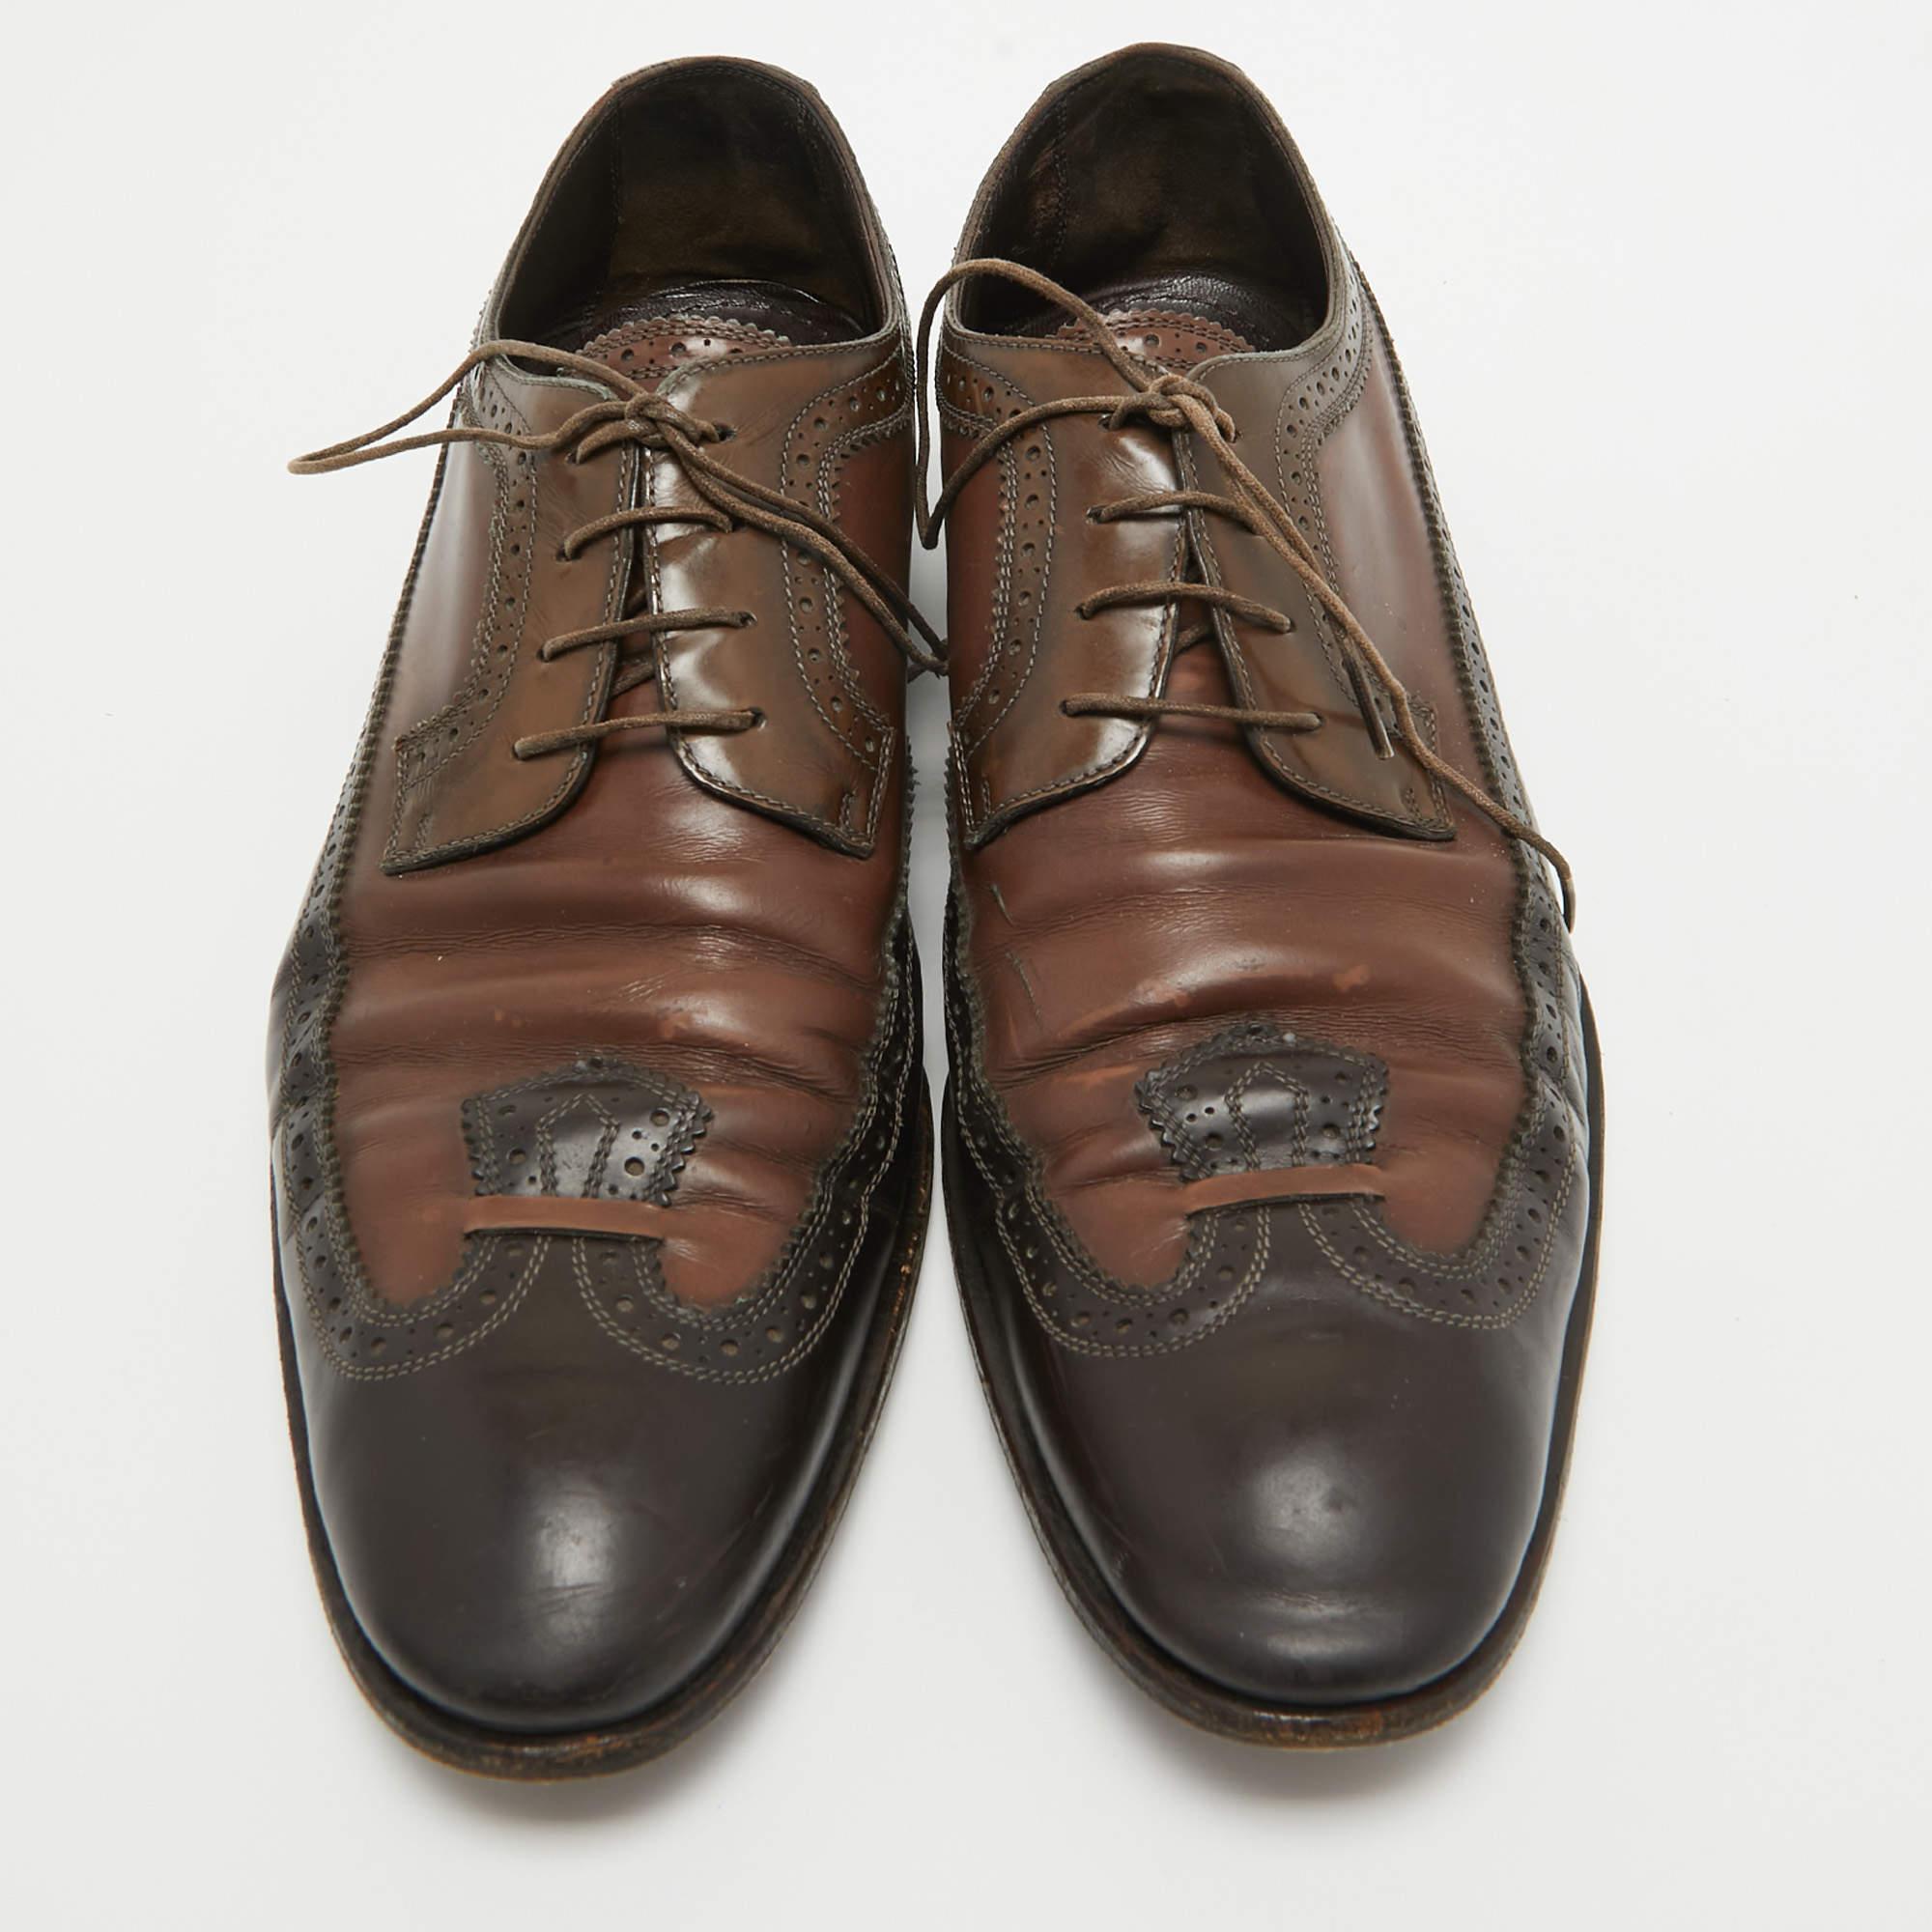 These Louis Vuitton derby shoes aim to deliver a fashionable result. Constructed using leather and secured with laces, these shoes are as durable as they are appealing.

